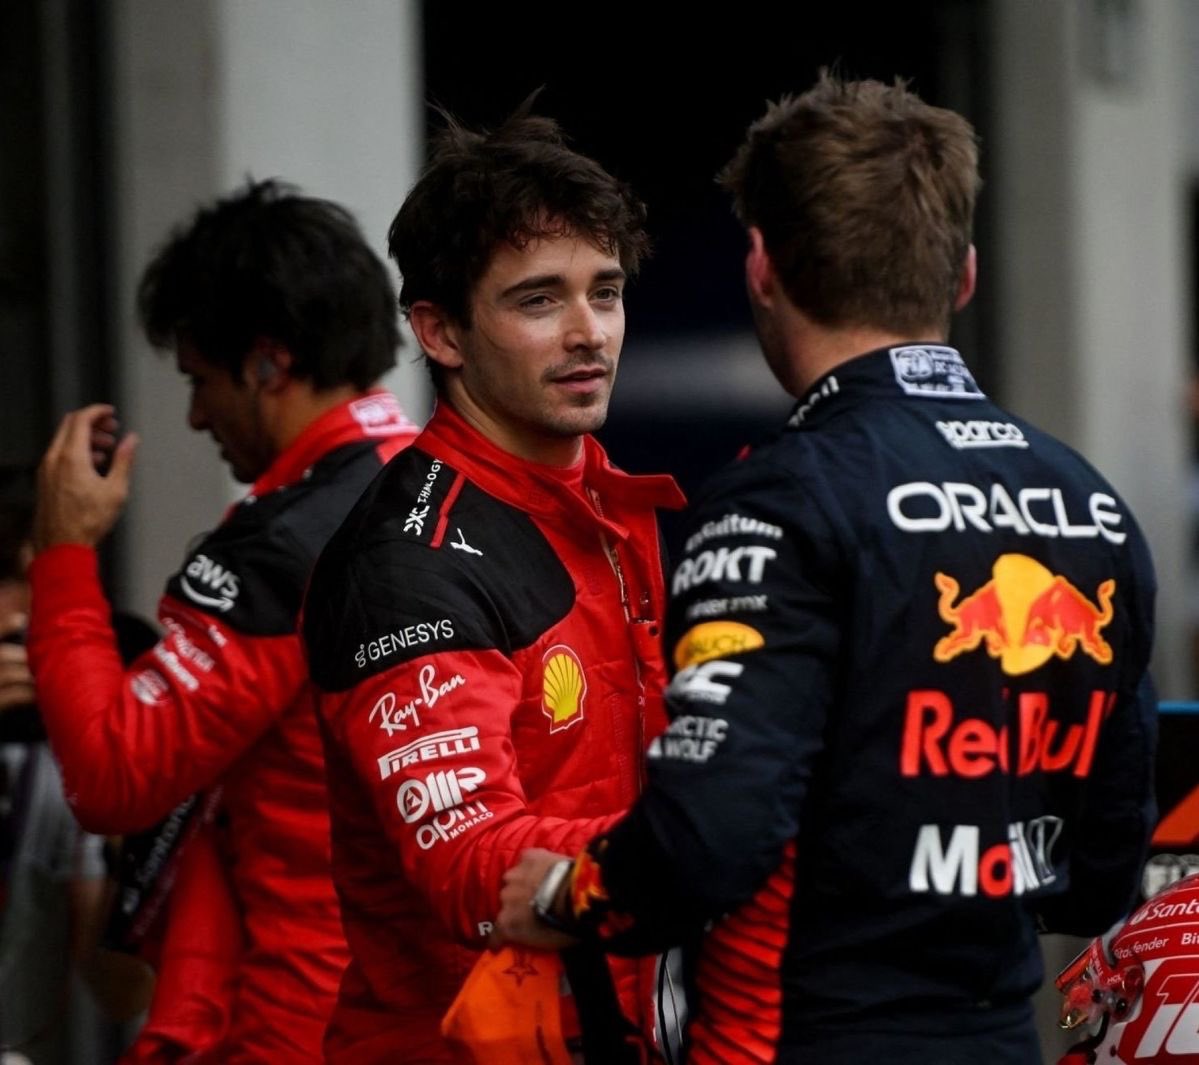 “Let's waste time-
Chasing cars,
Around our heads” 

#MaxVerstappen #CharlesLeclerc